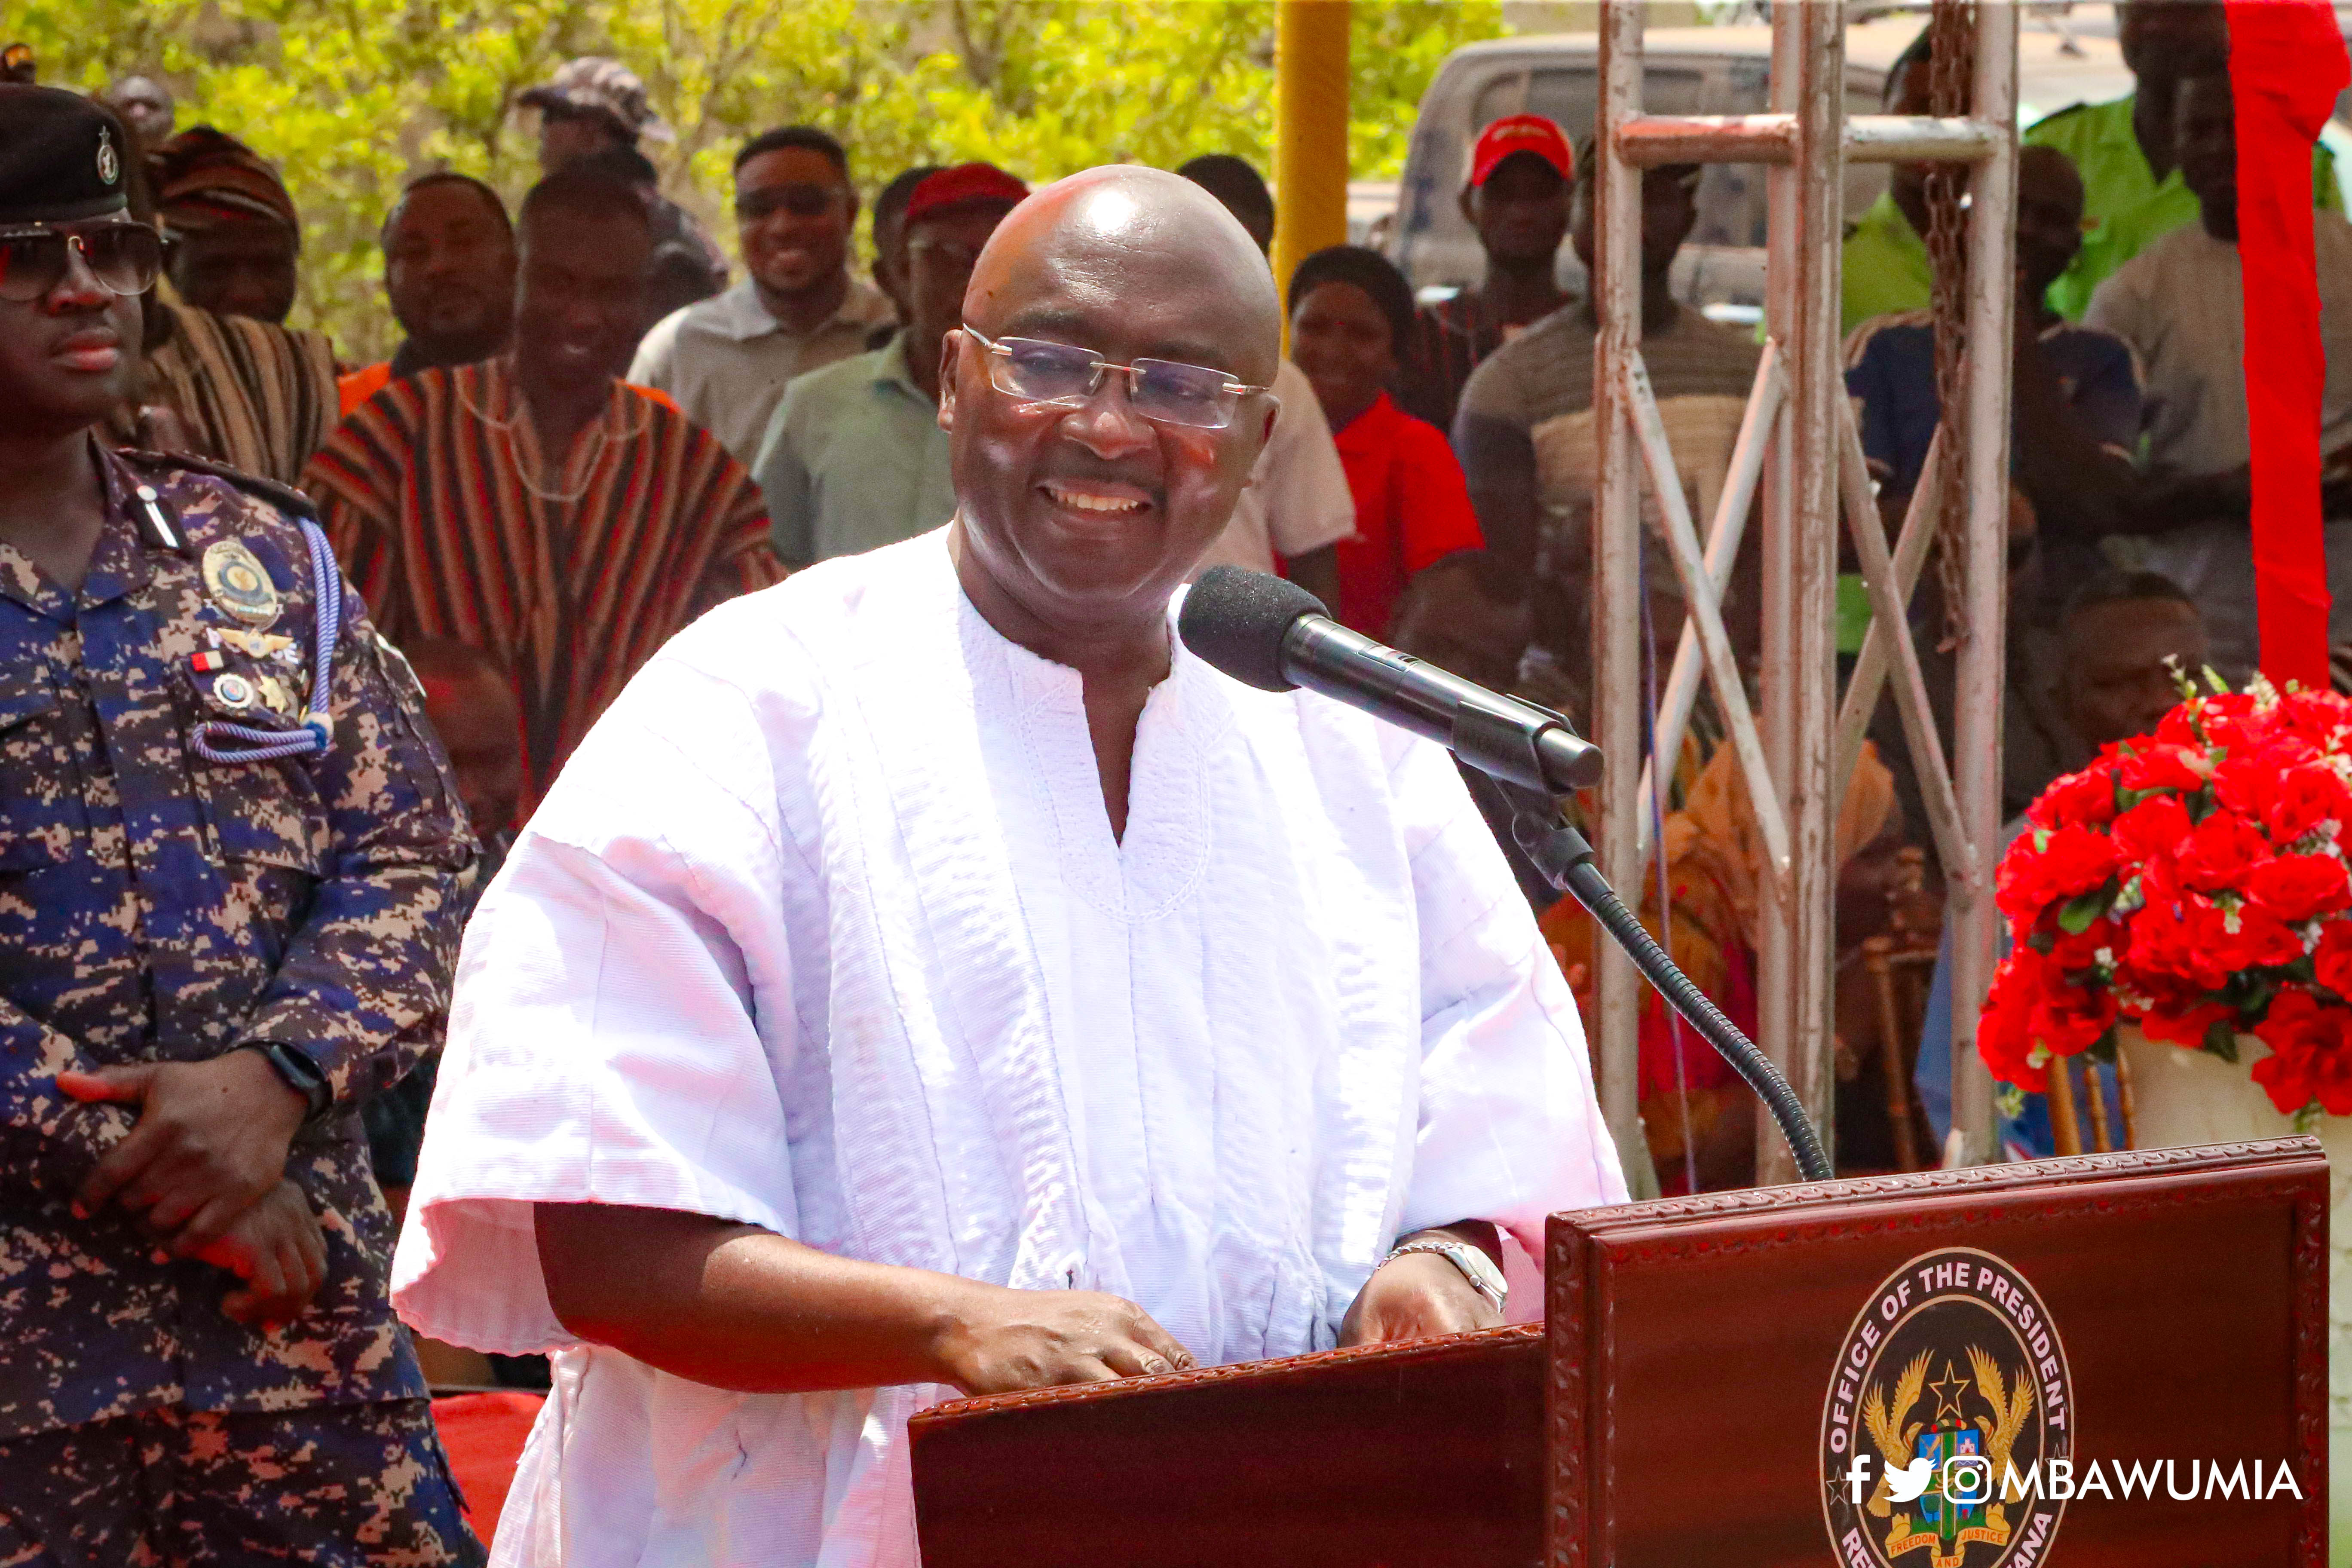 Ghana’s economic woes due to COVID-19, Russia-Ukraine war and banking reforms — Bawumia